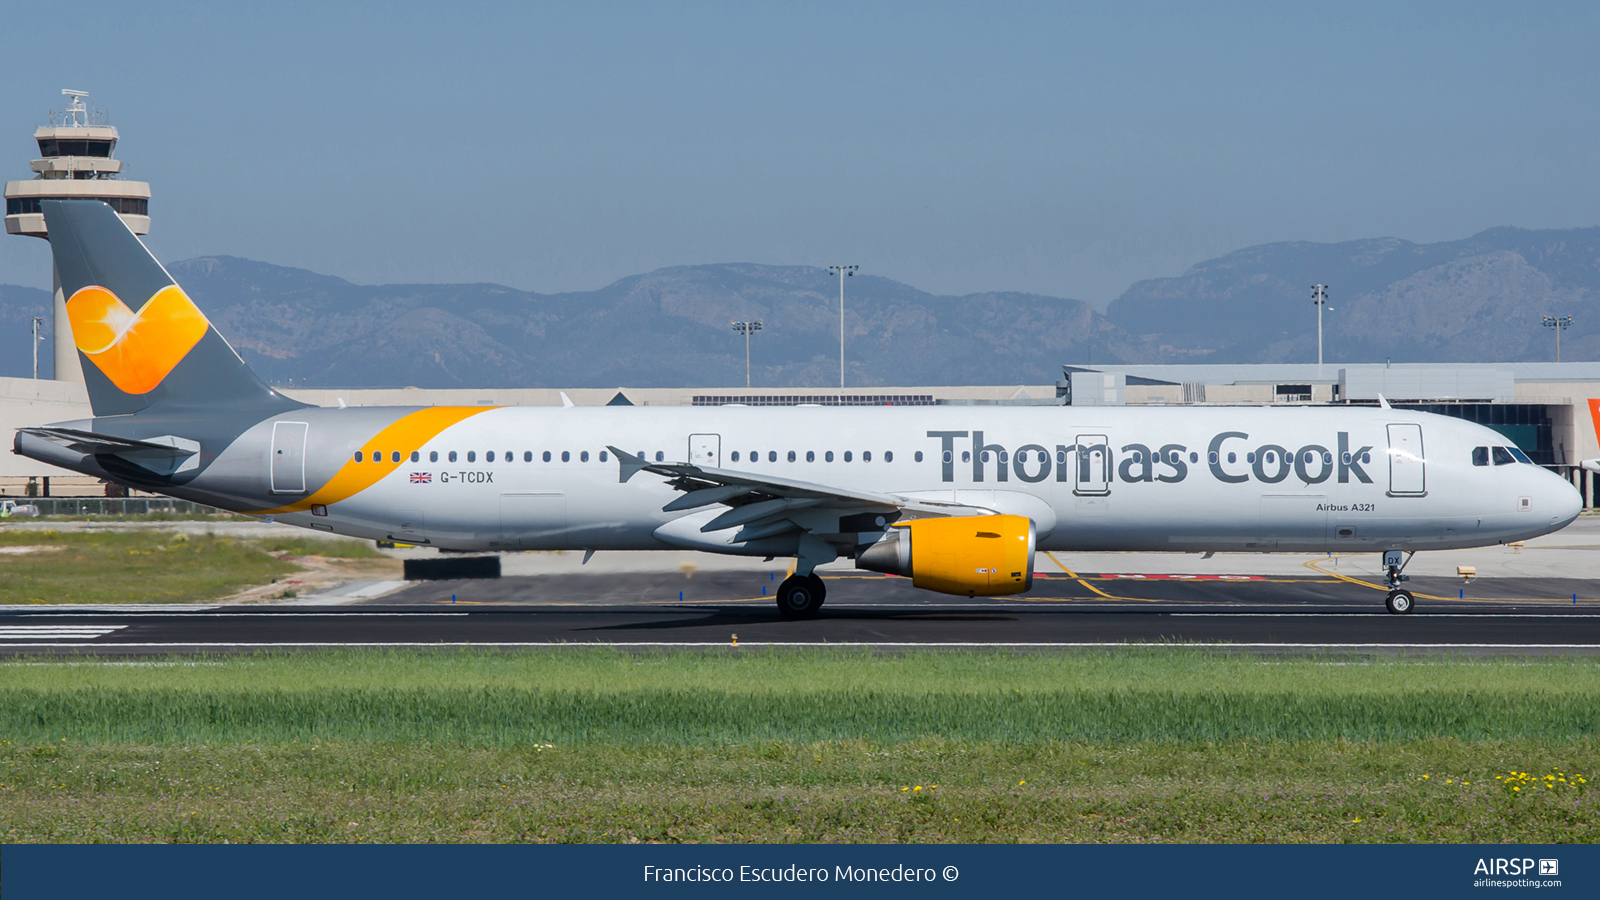 Thomas Cook Airlines  Airbus A321  G-TCDX